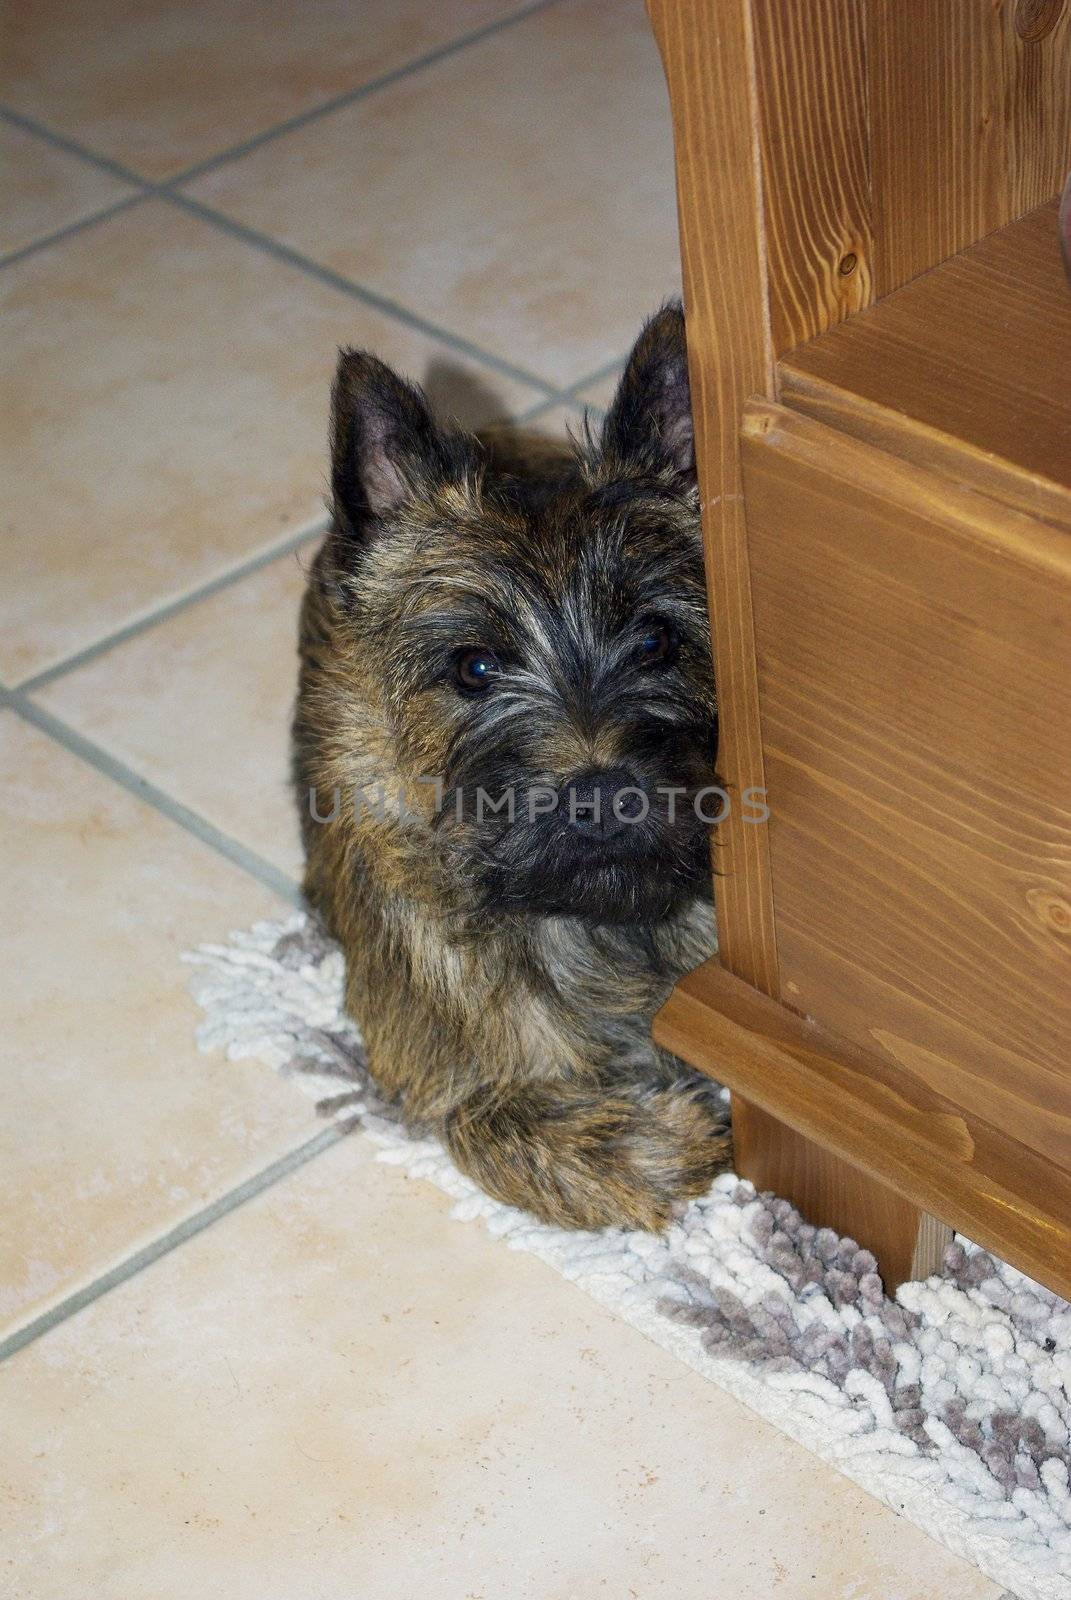 It's a puppy on the floor looking the camera behind a wood furniture